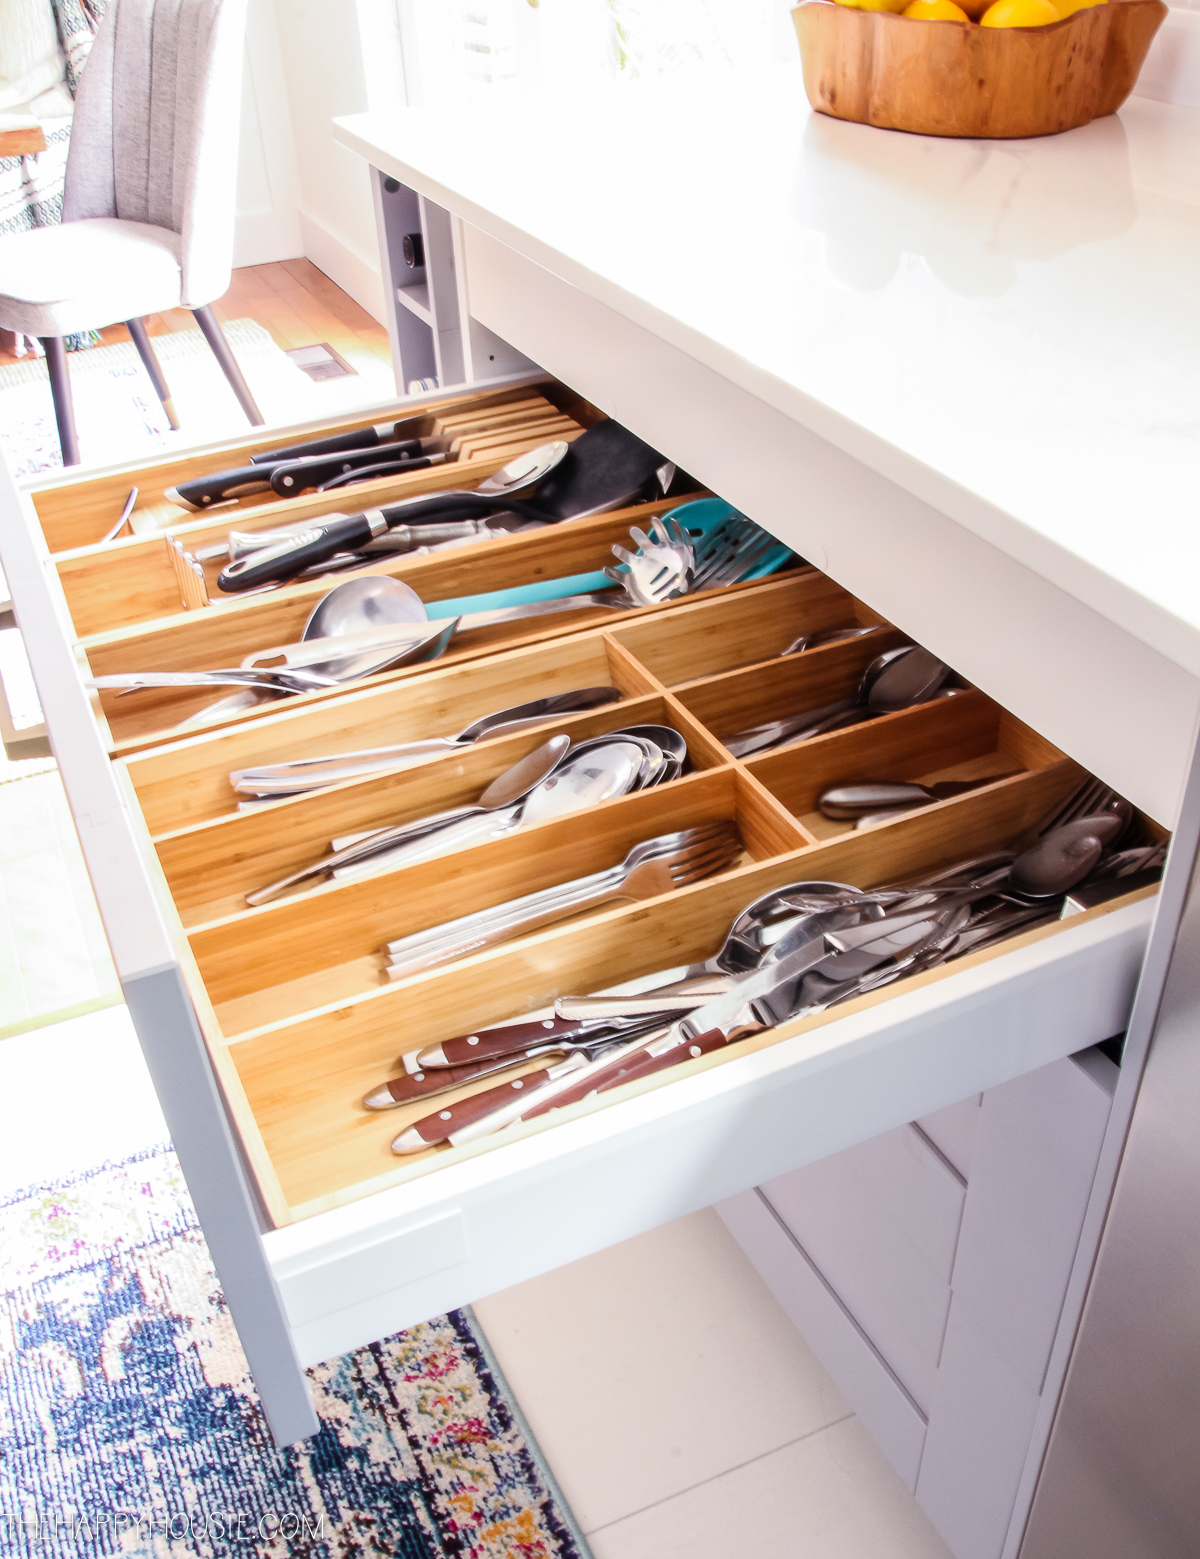 A wooden cutlery tray in the drawer in the kitchen.